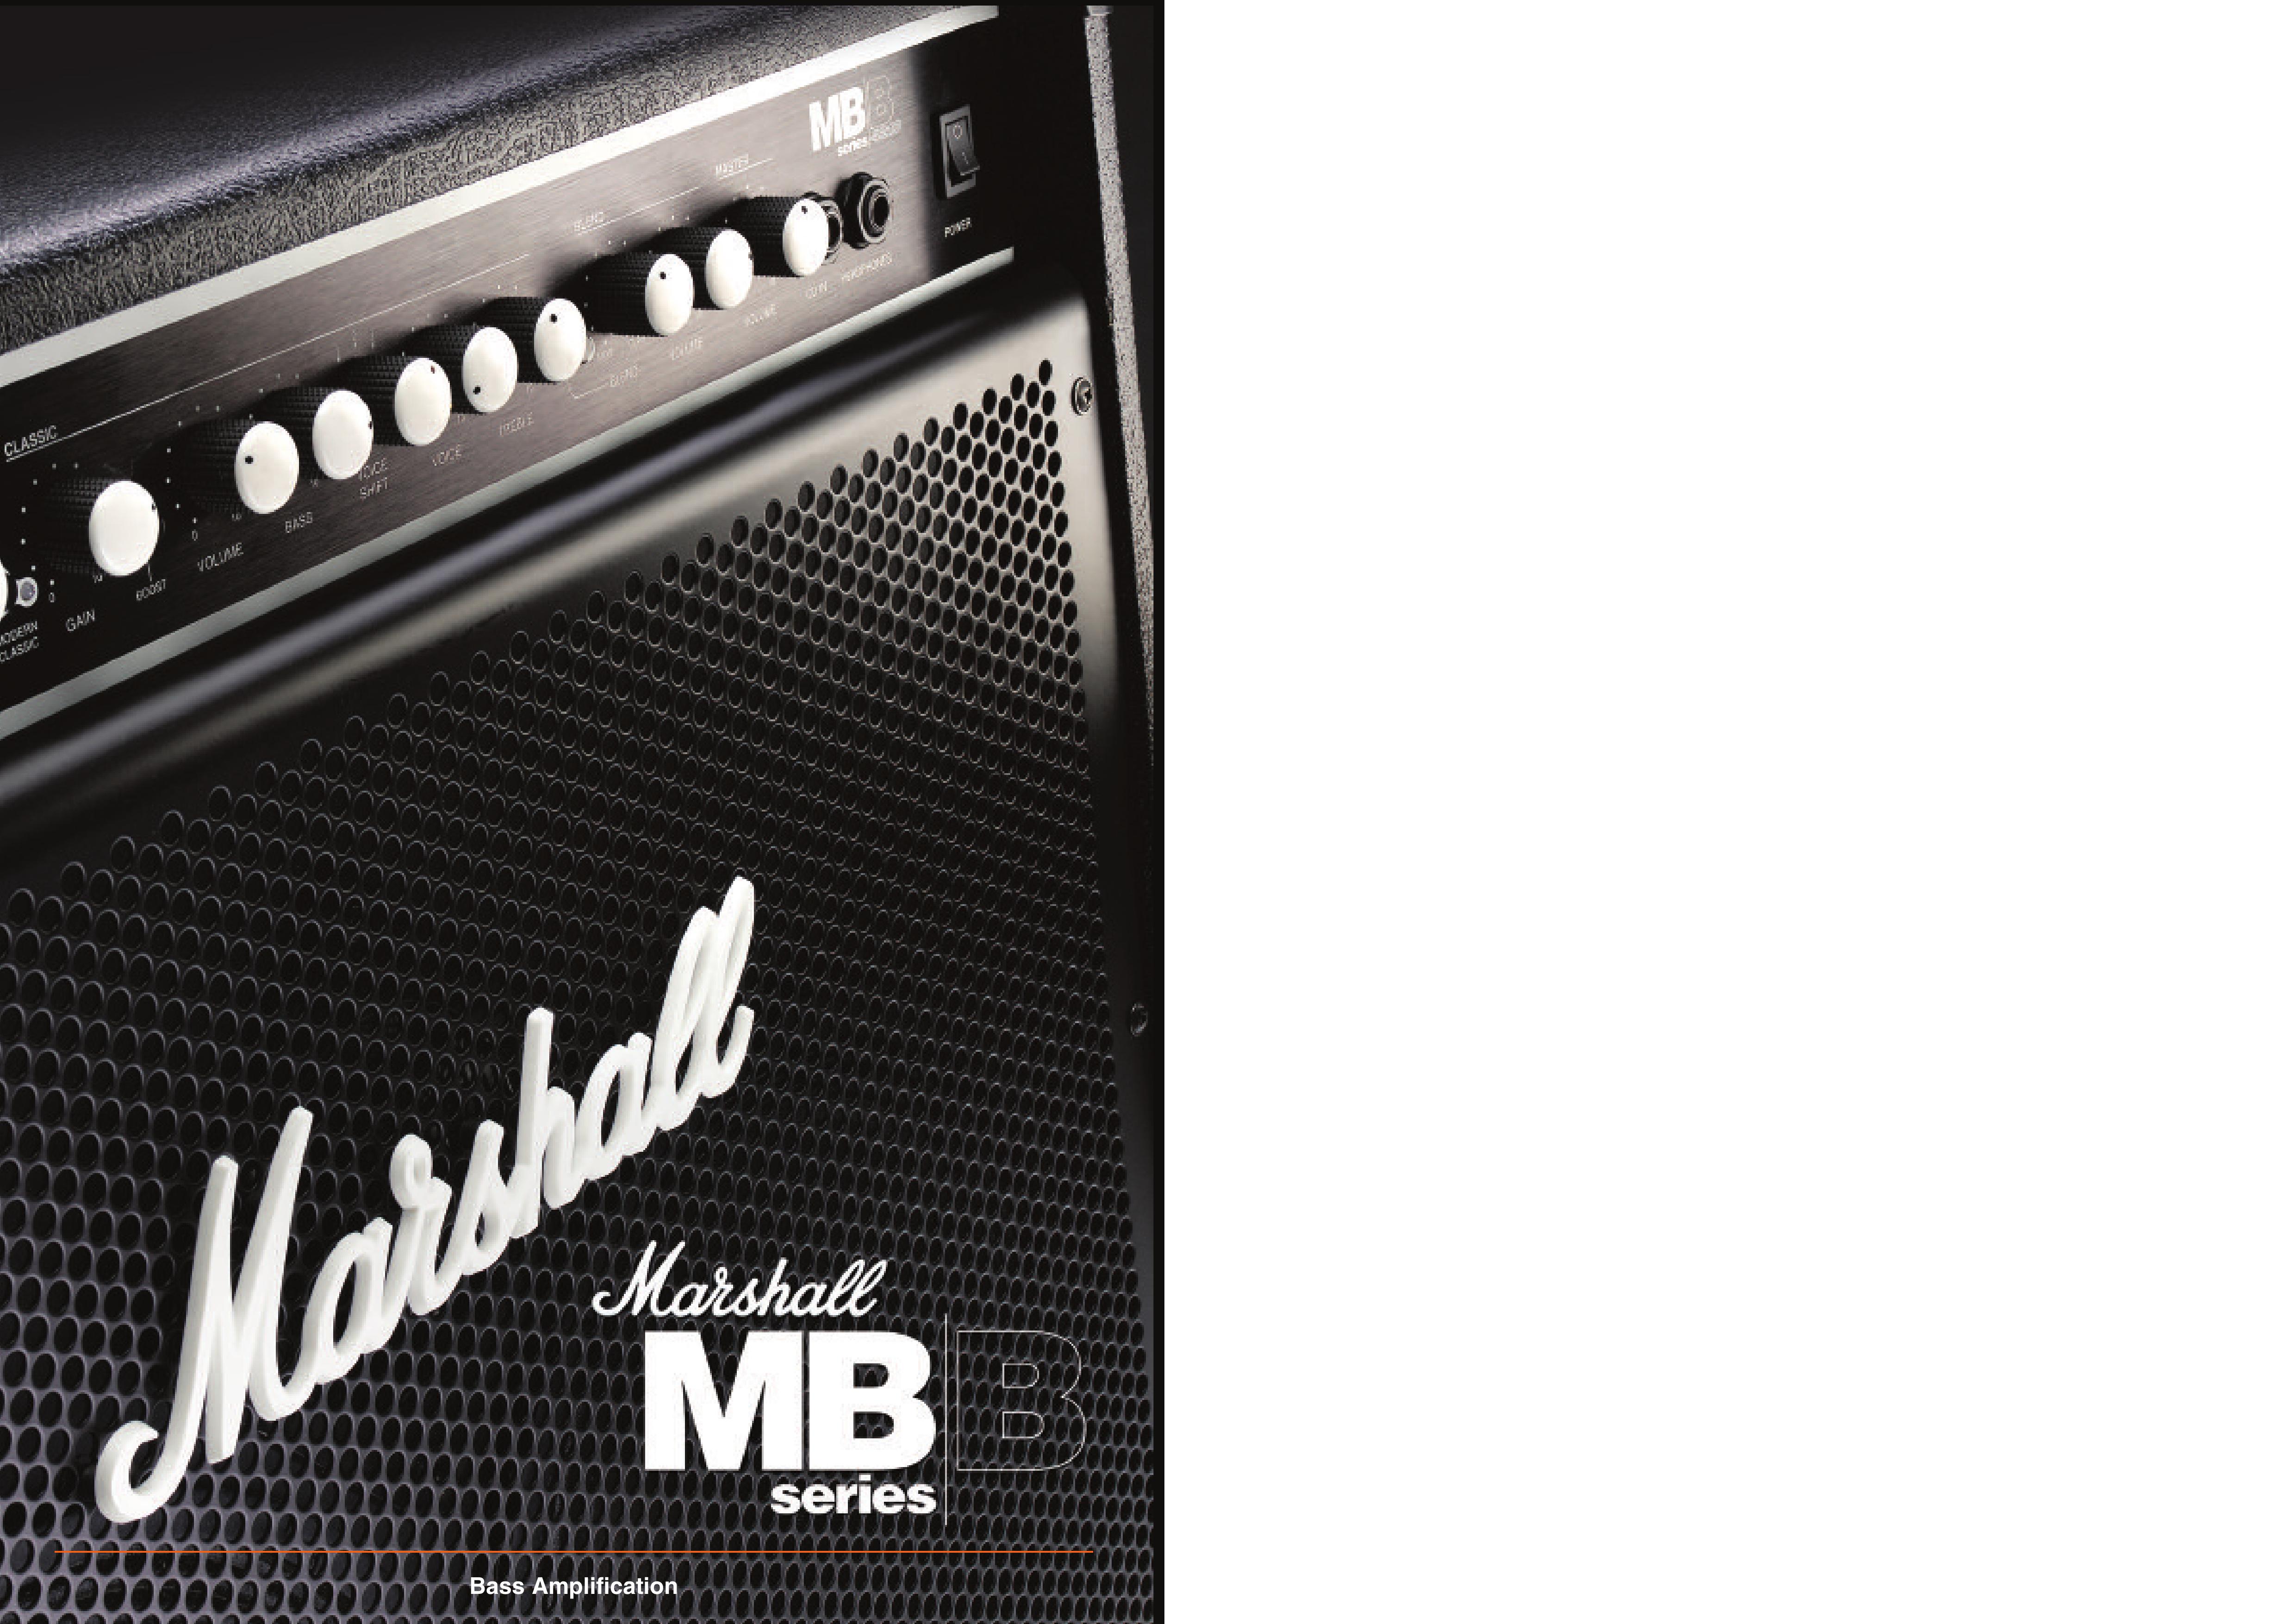 Marshall Amplification MB Series Musical Instrument Amplifier User Manual